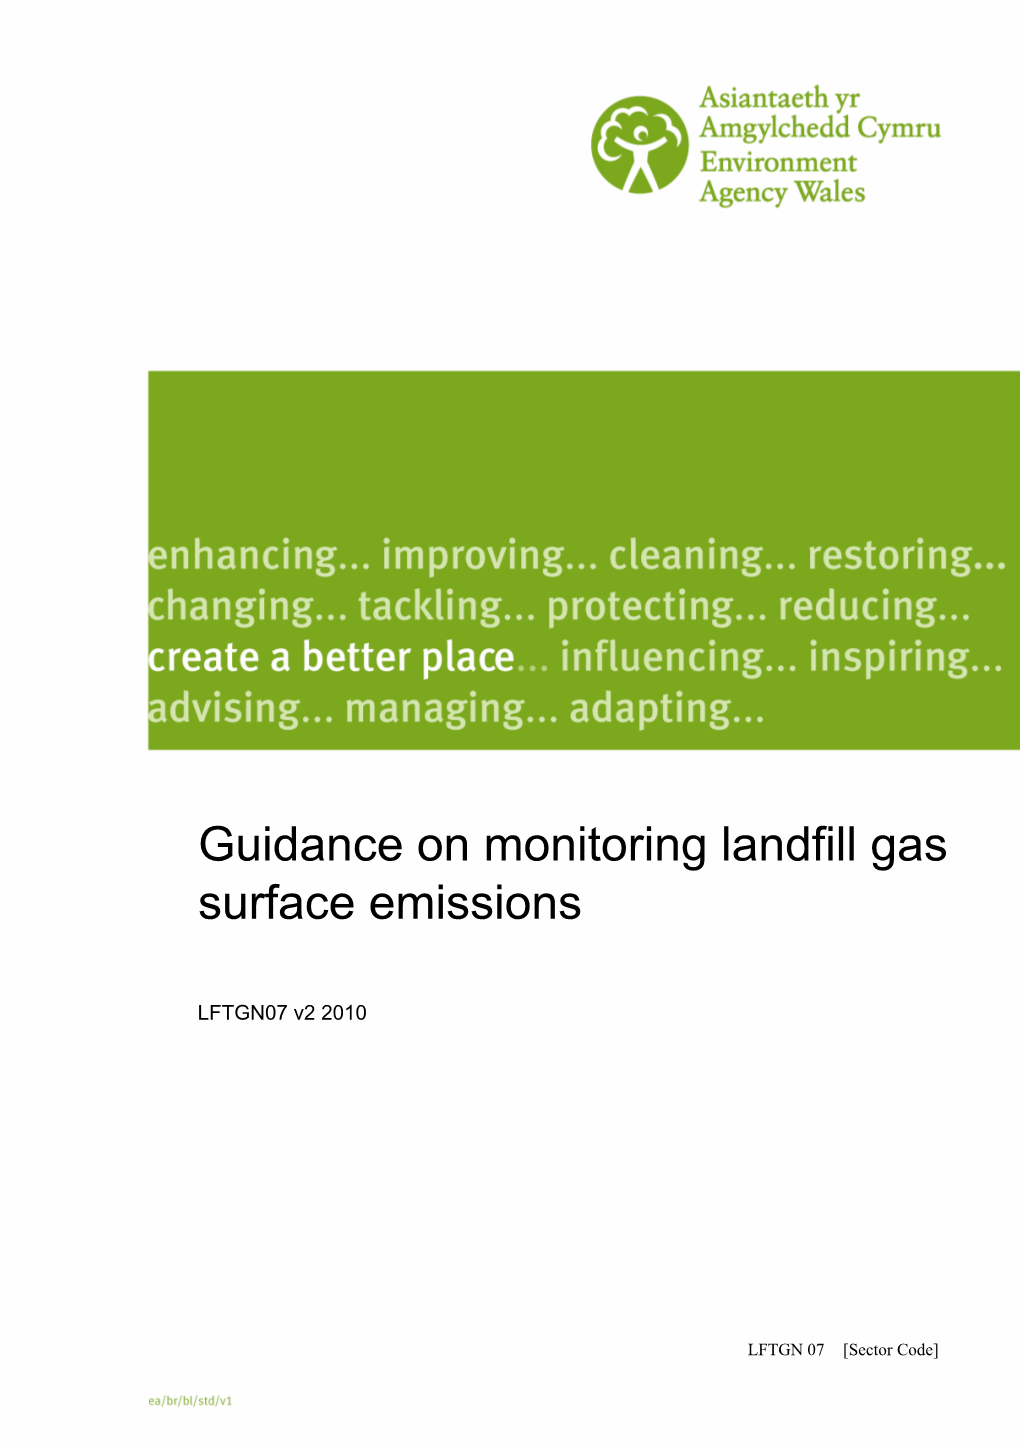 LFTGN07 Guidance on Monitoring Landfill Gas Surface Emissions